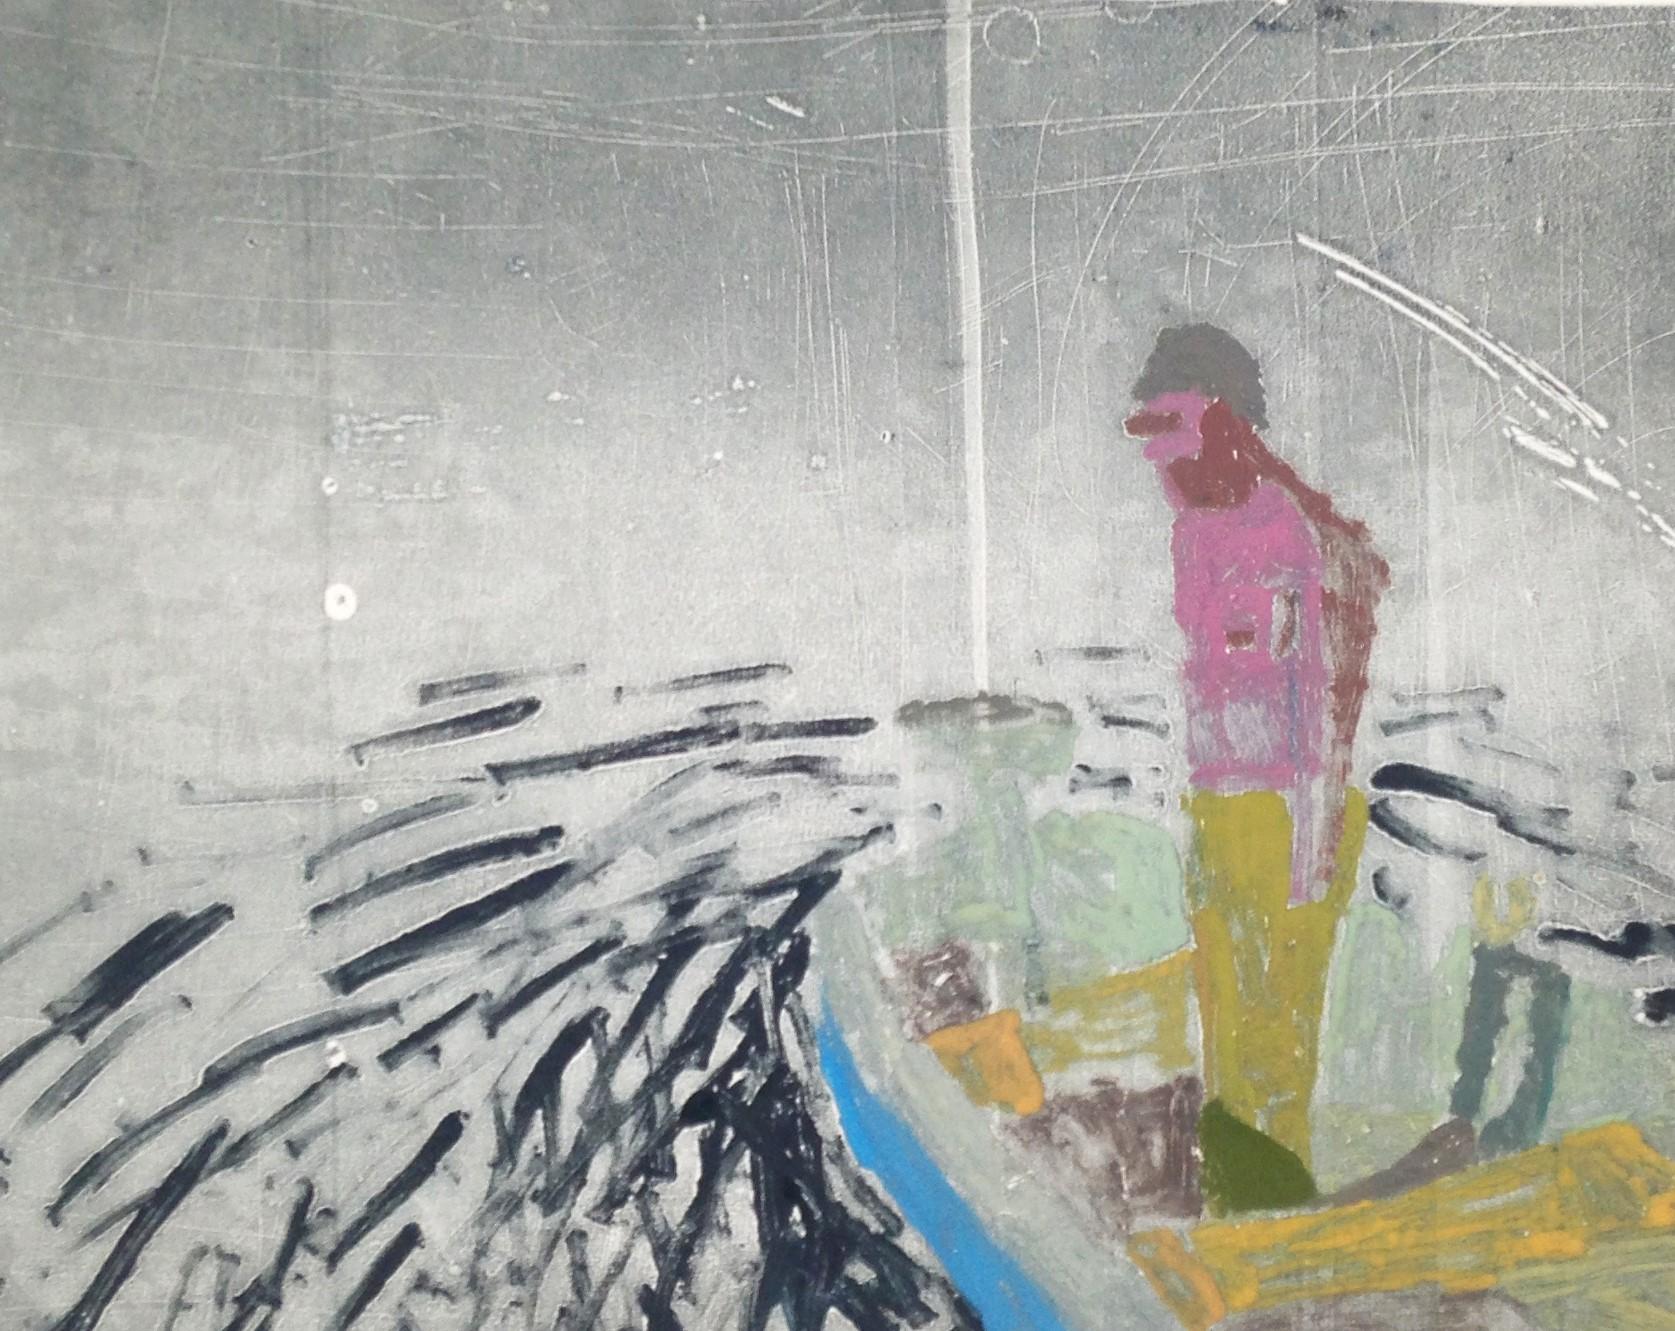 Night Boat, Monotype with Man in Pink Standing in Boat in Water at Nighttime - Print by Sophie Treppendahl